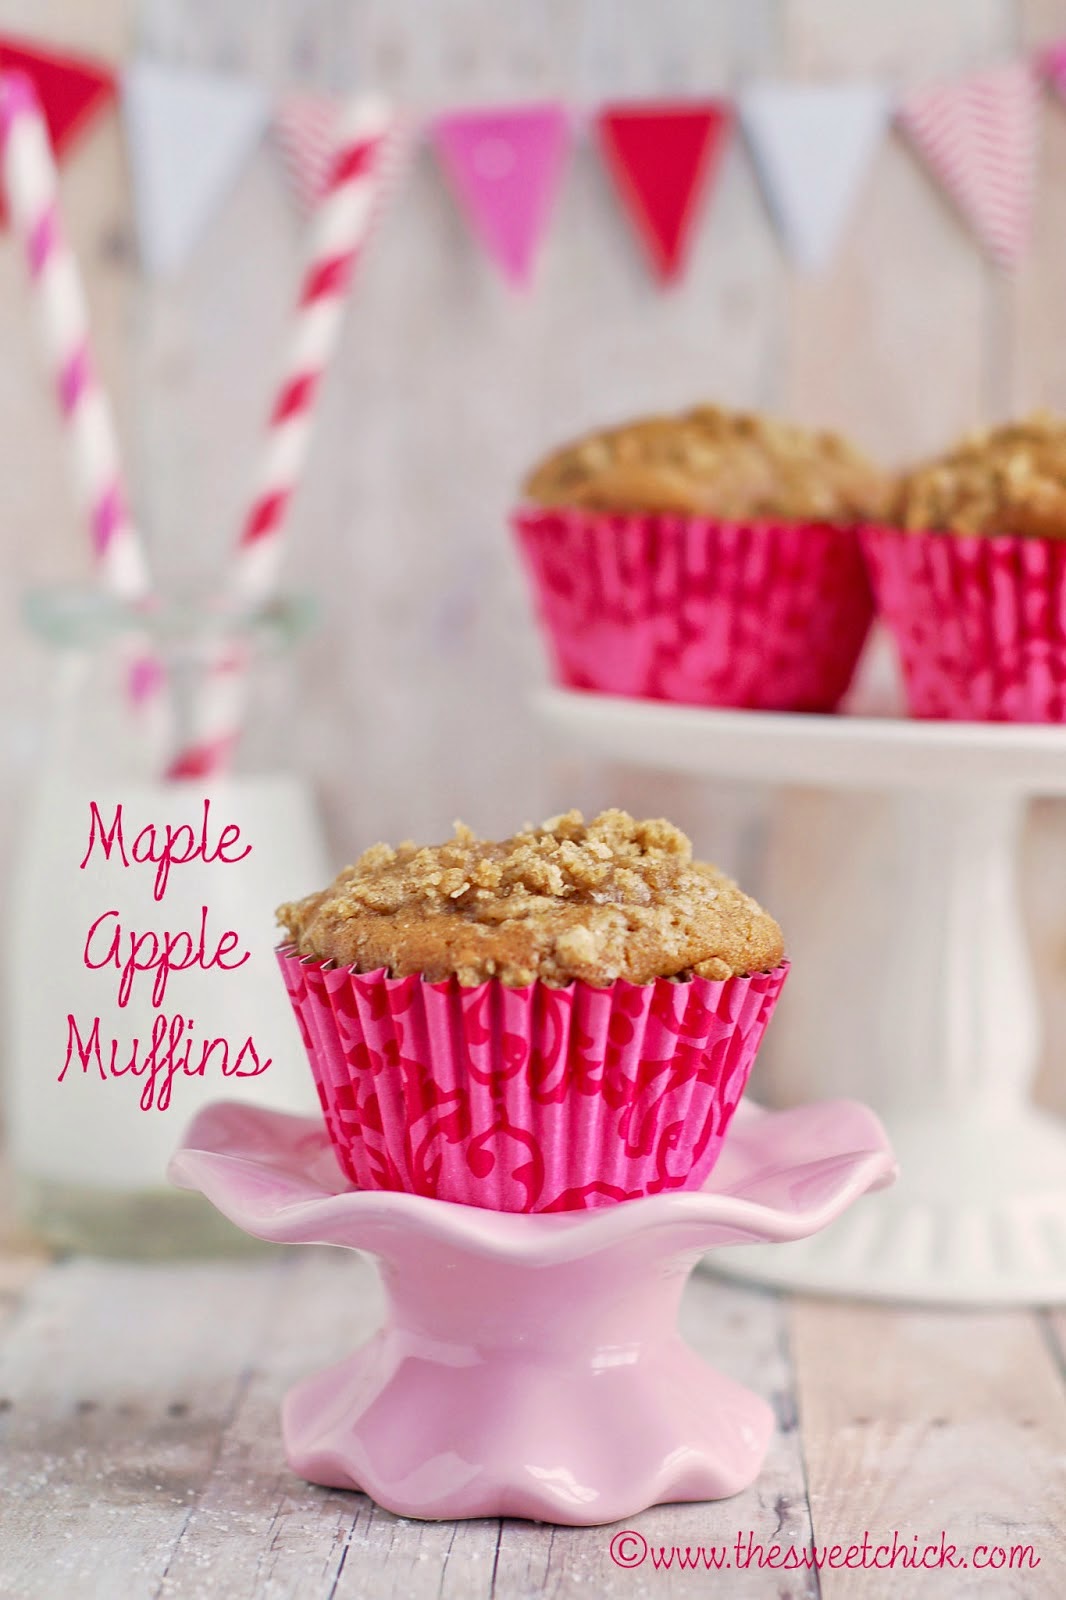 Maple Apple Muffins by The Sweet Chick